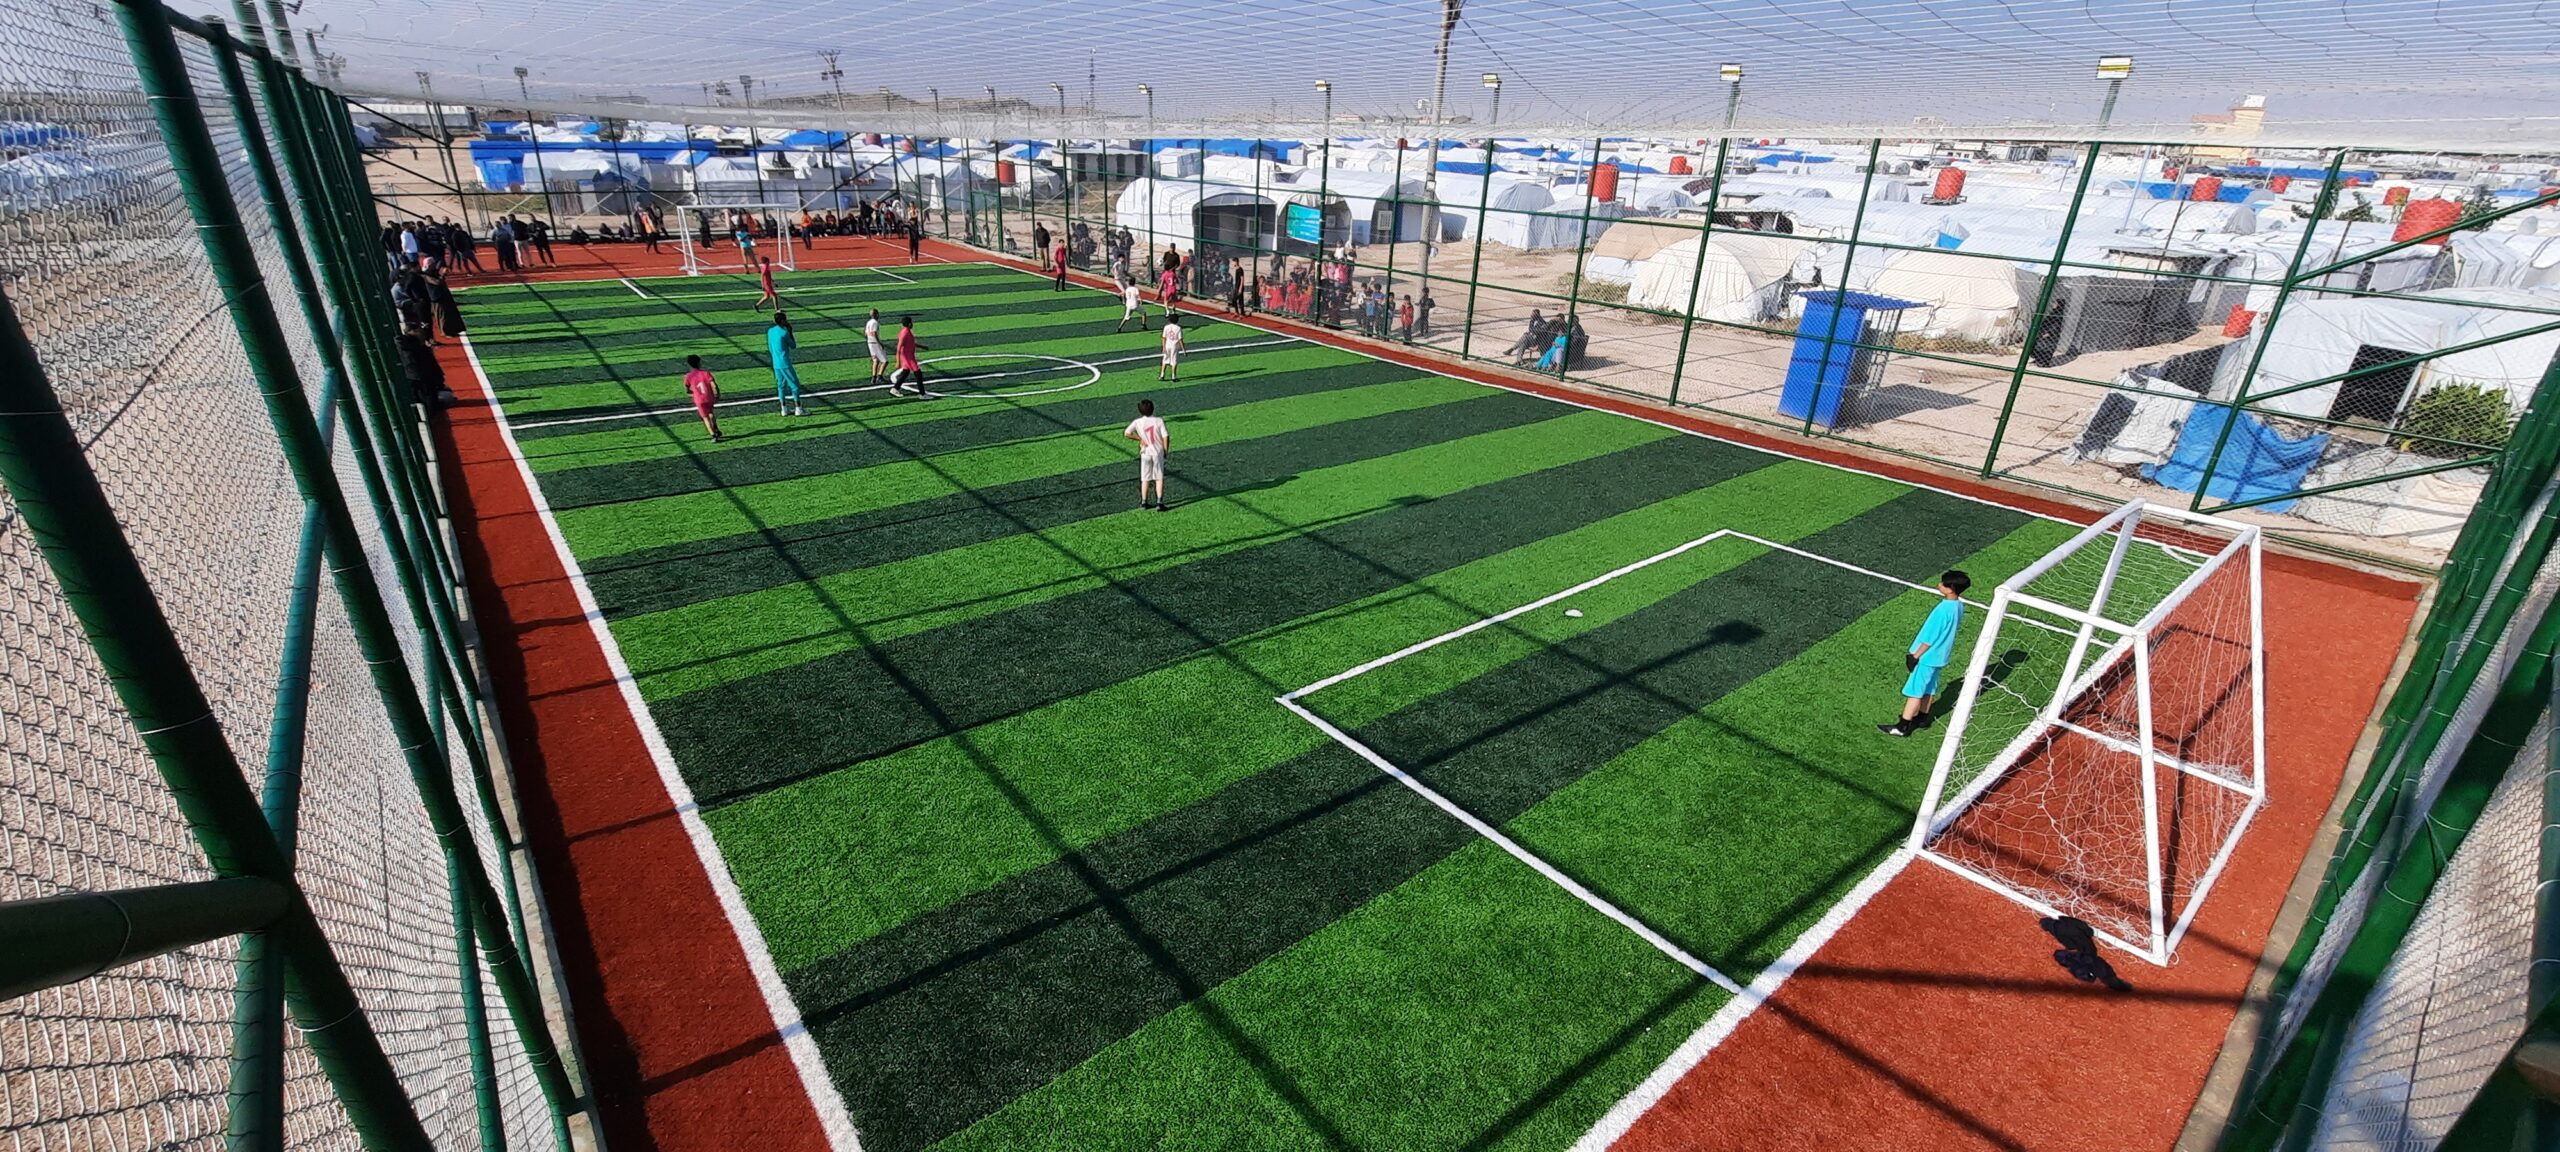 Child-Friendly Soccer Field in Northeast Syrian Camp